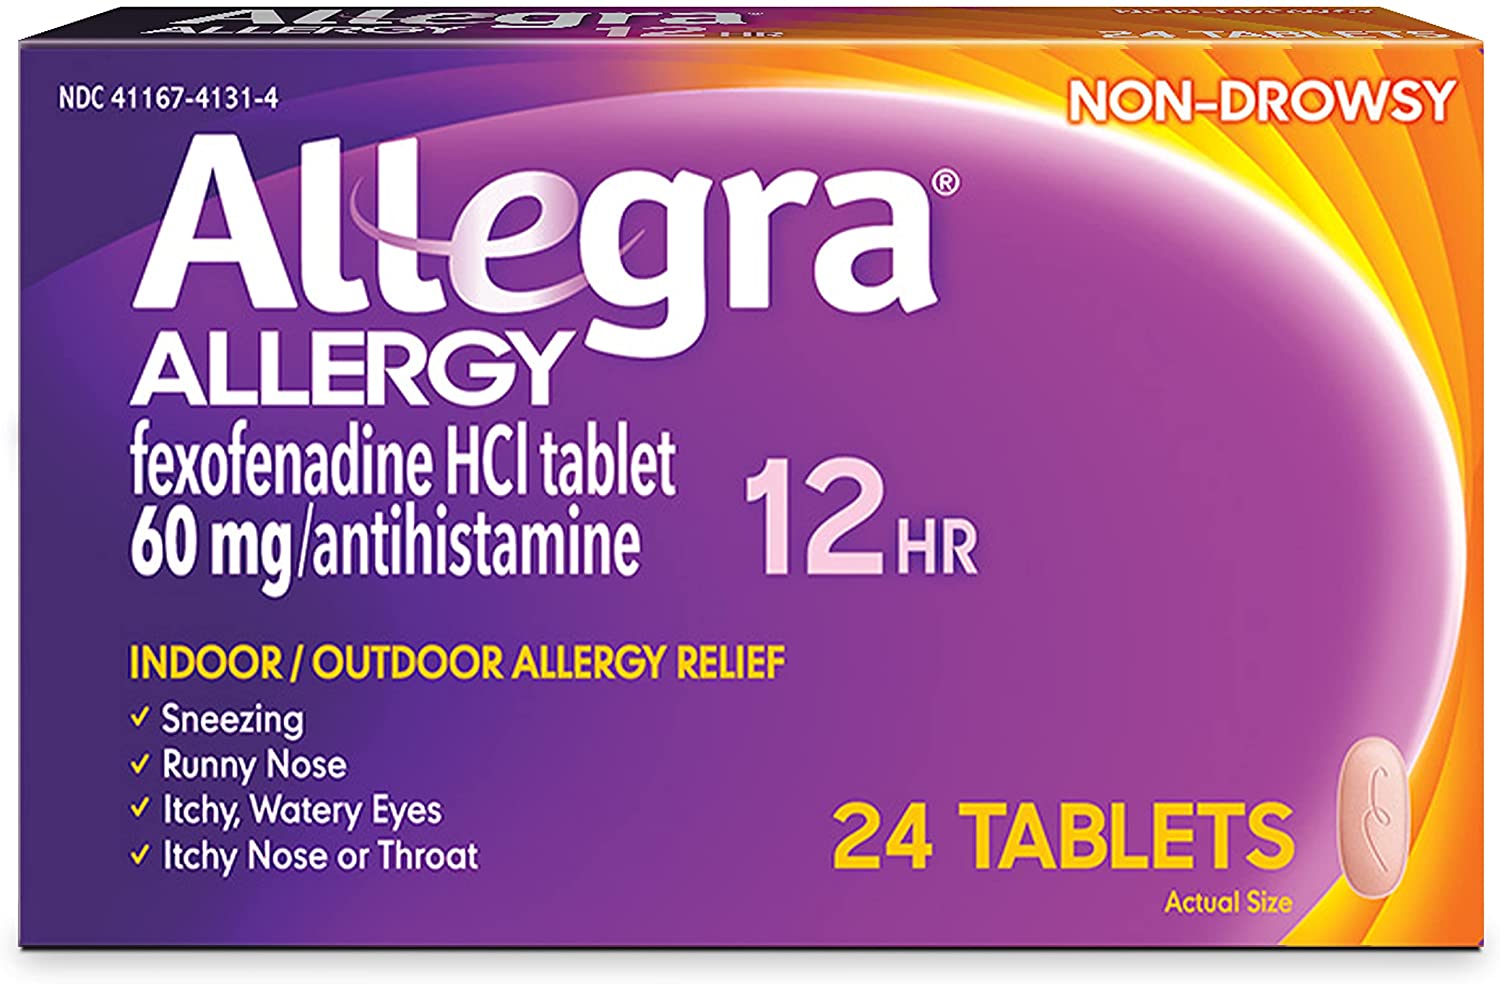 Allegra Allergy 12 Hour Non-Drowsy Tablets 24 ea - image 1 of 2